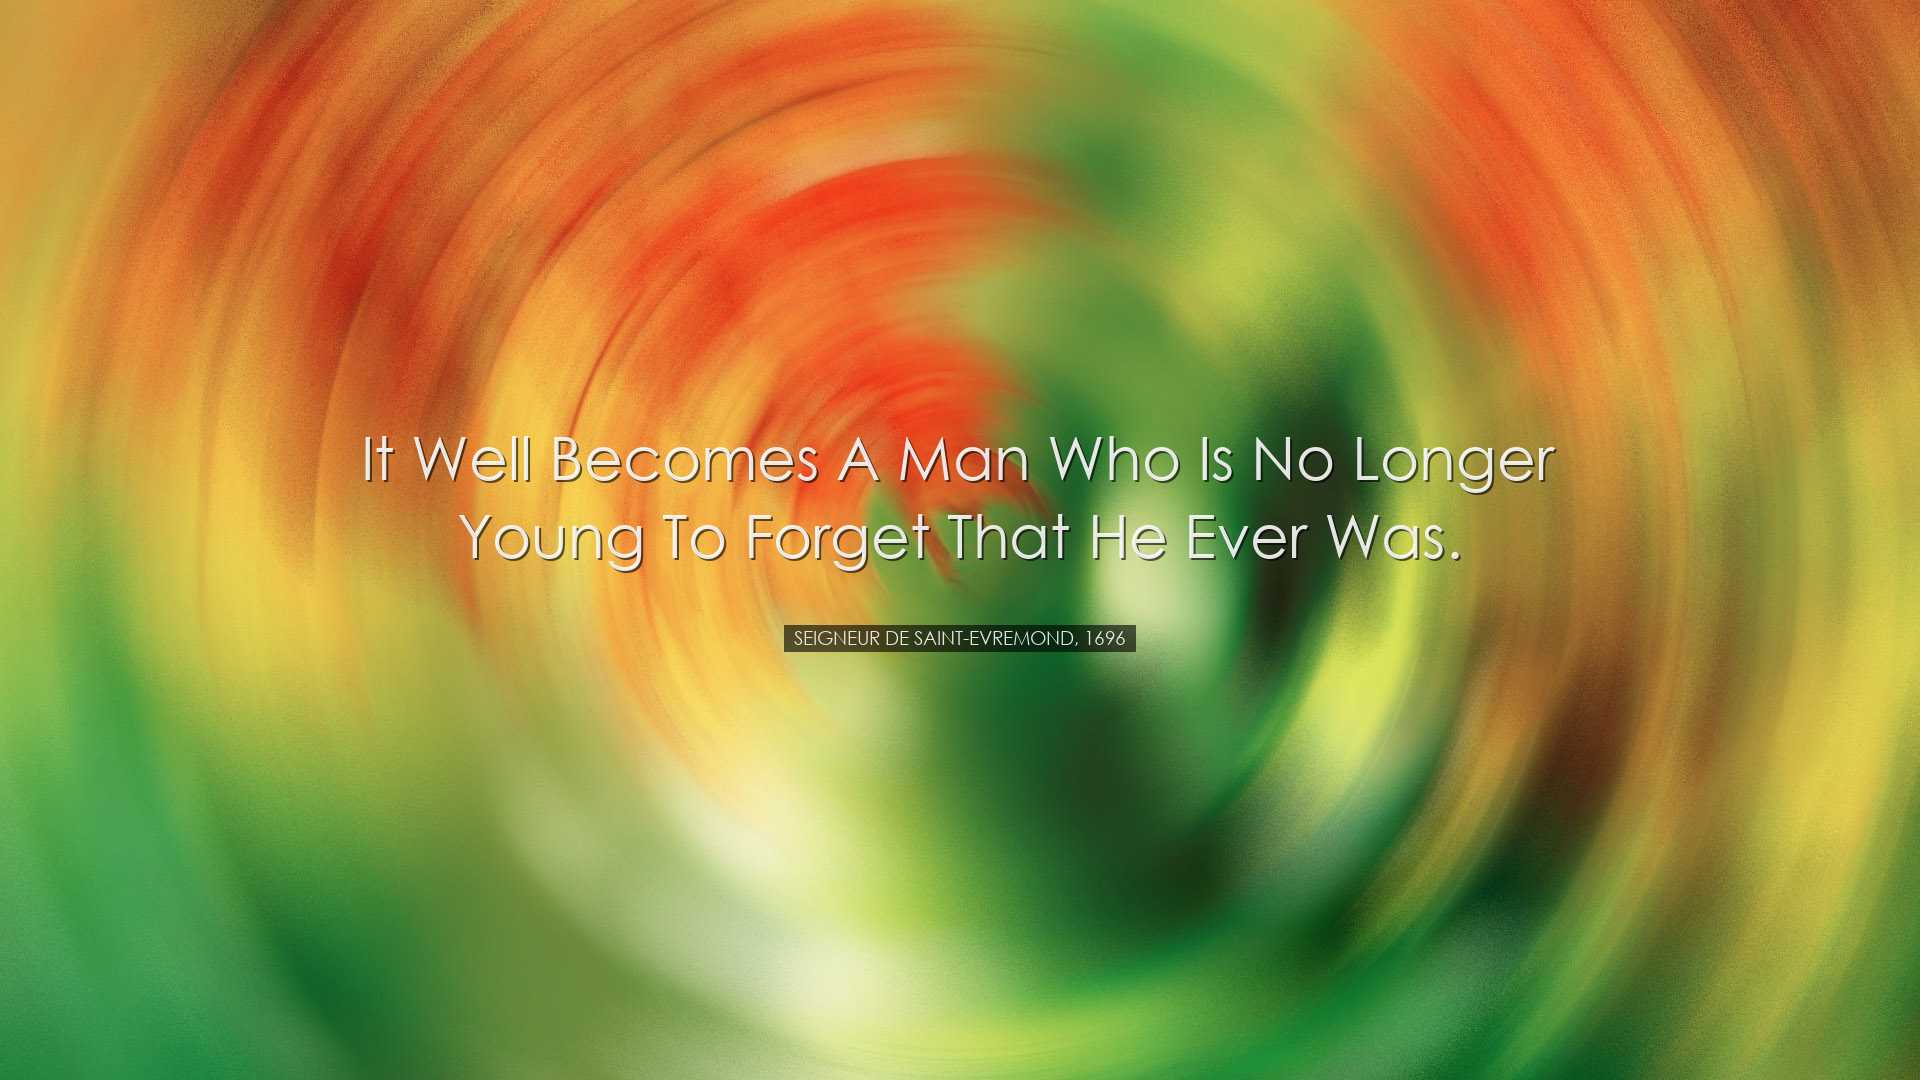 It well becomes a man who is no longer young to forget that he eve